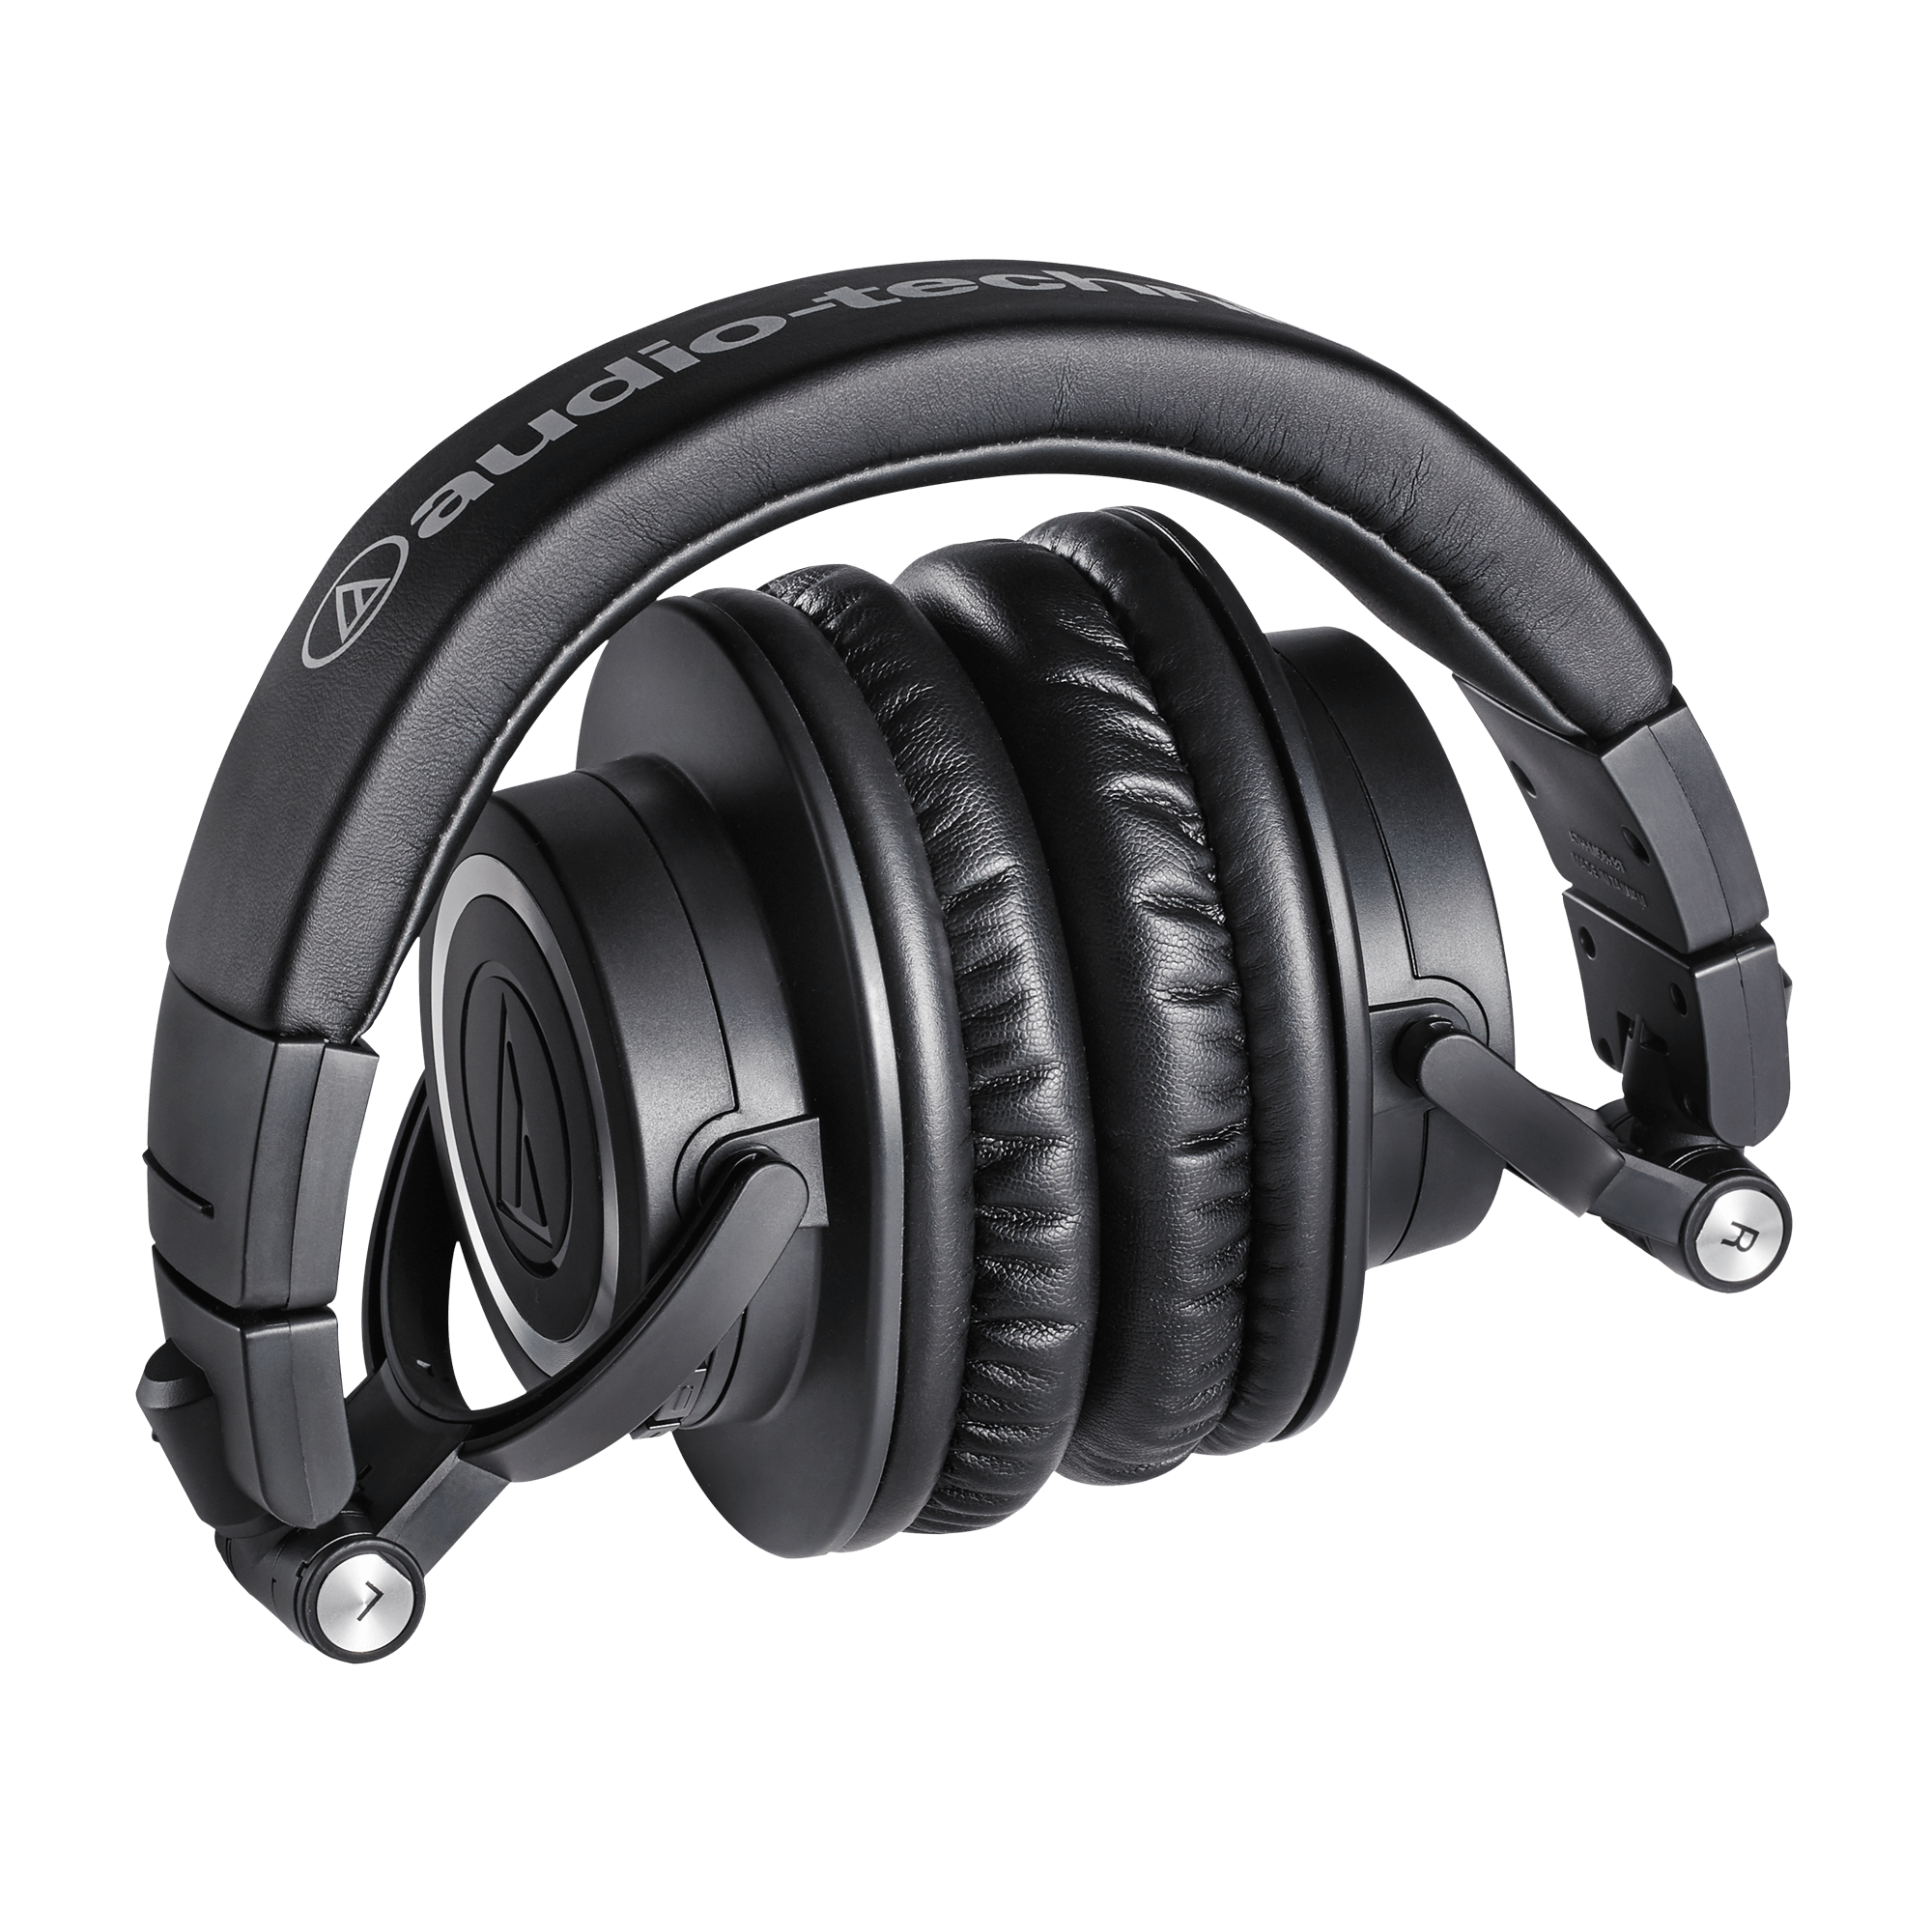 Sow gift Take-up ATH-M50xBTBluetooth Over-ear Headphones